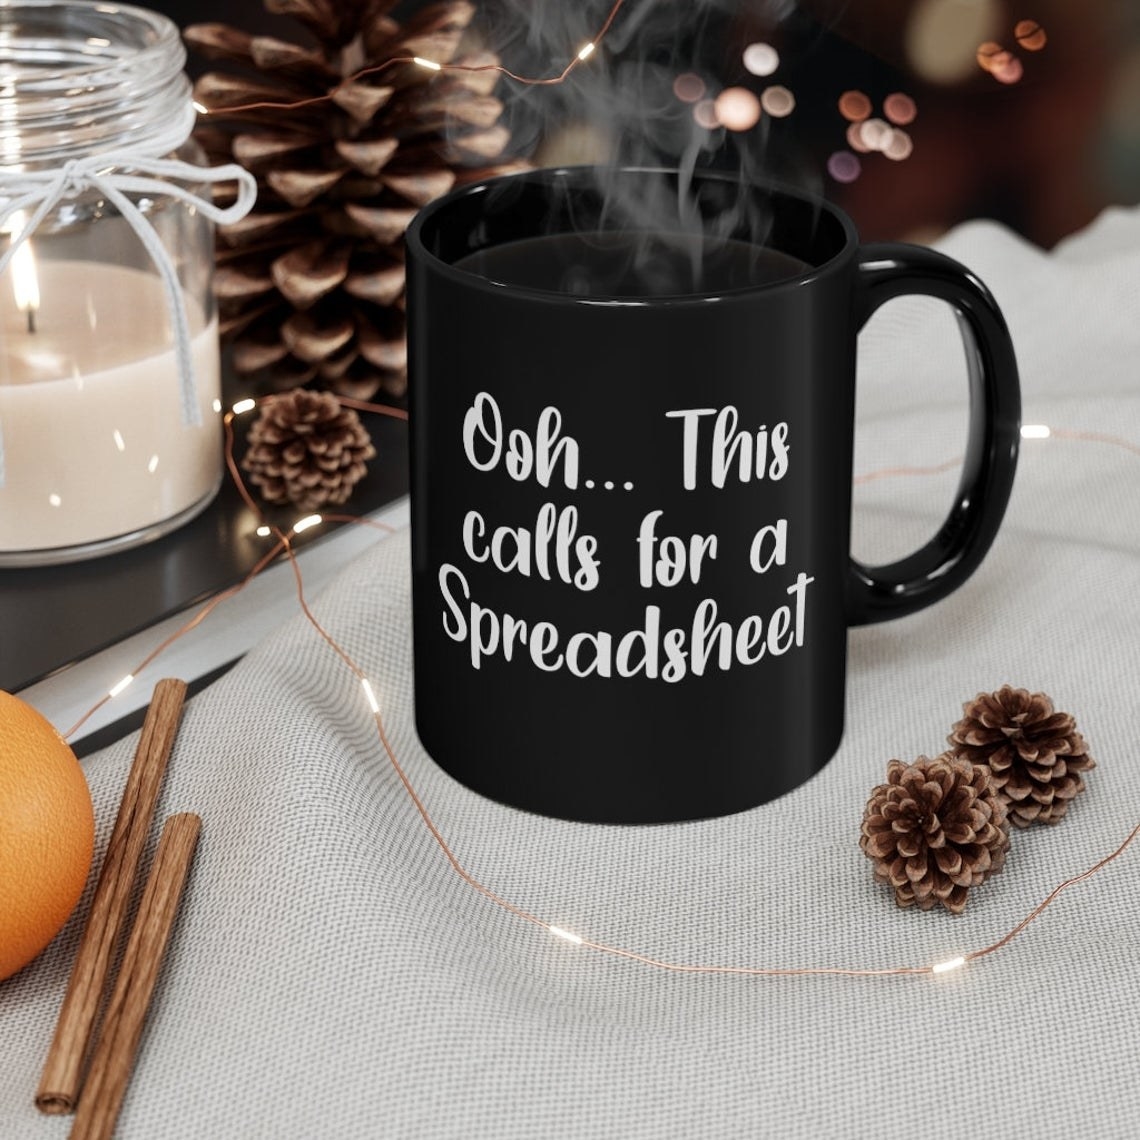 Mug that says &quot;Ooh... This calls for a spreadsheet&quot; 